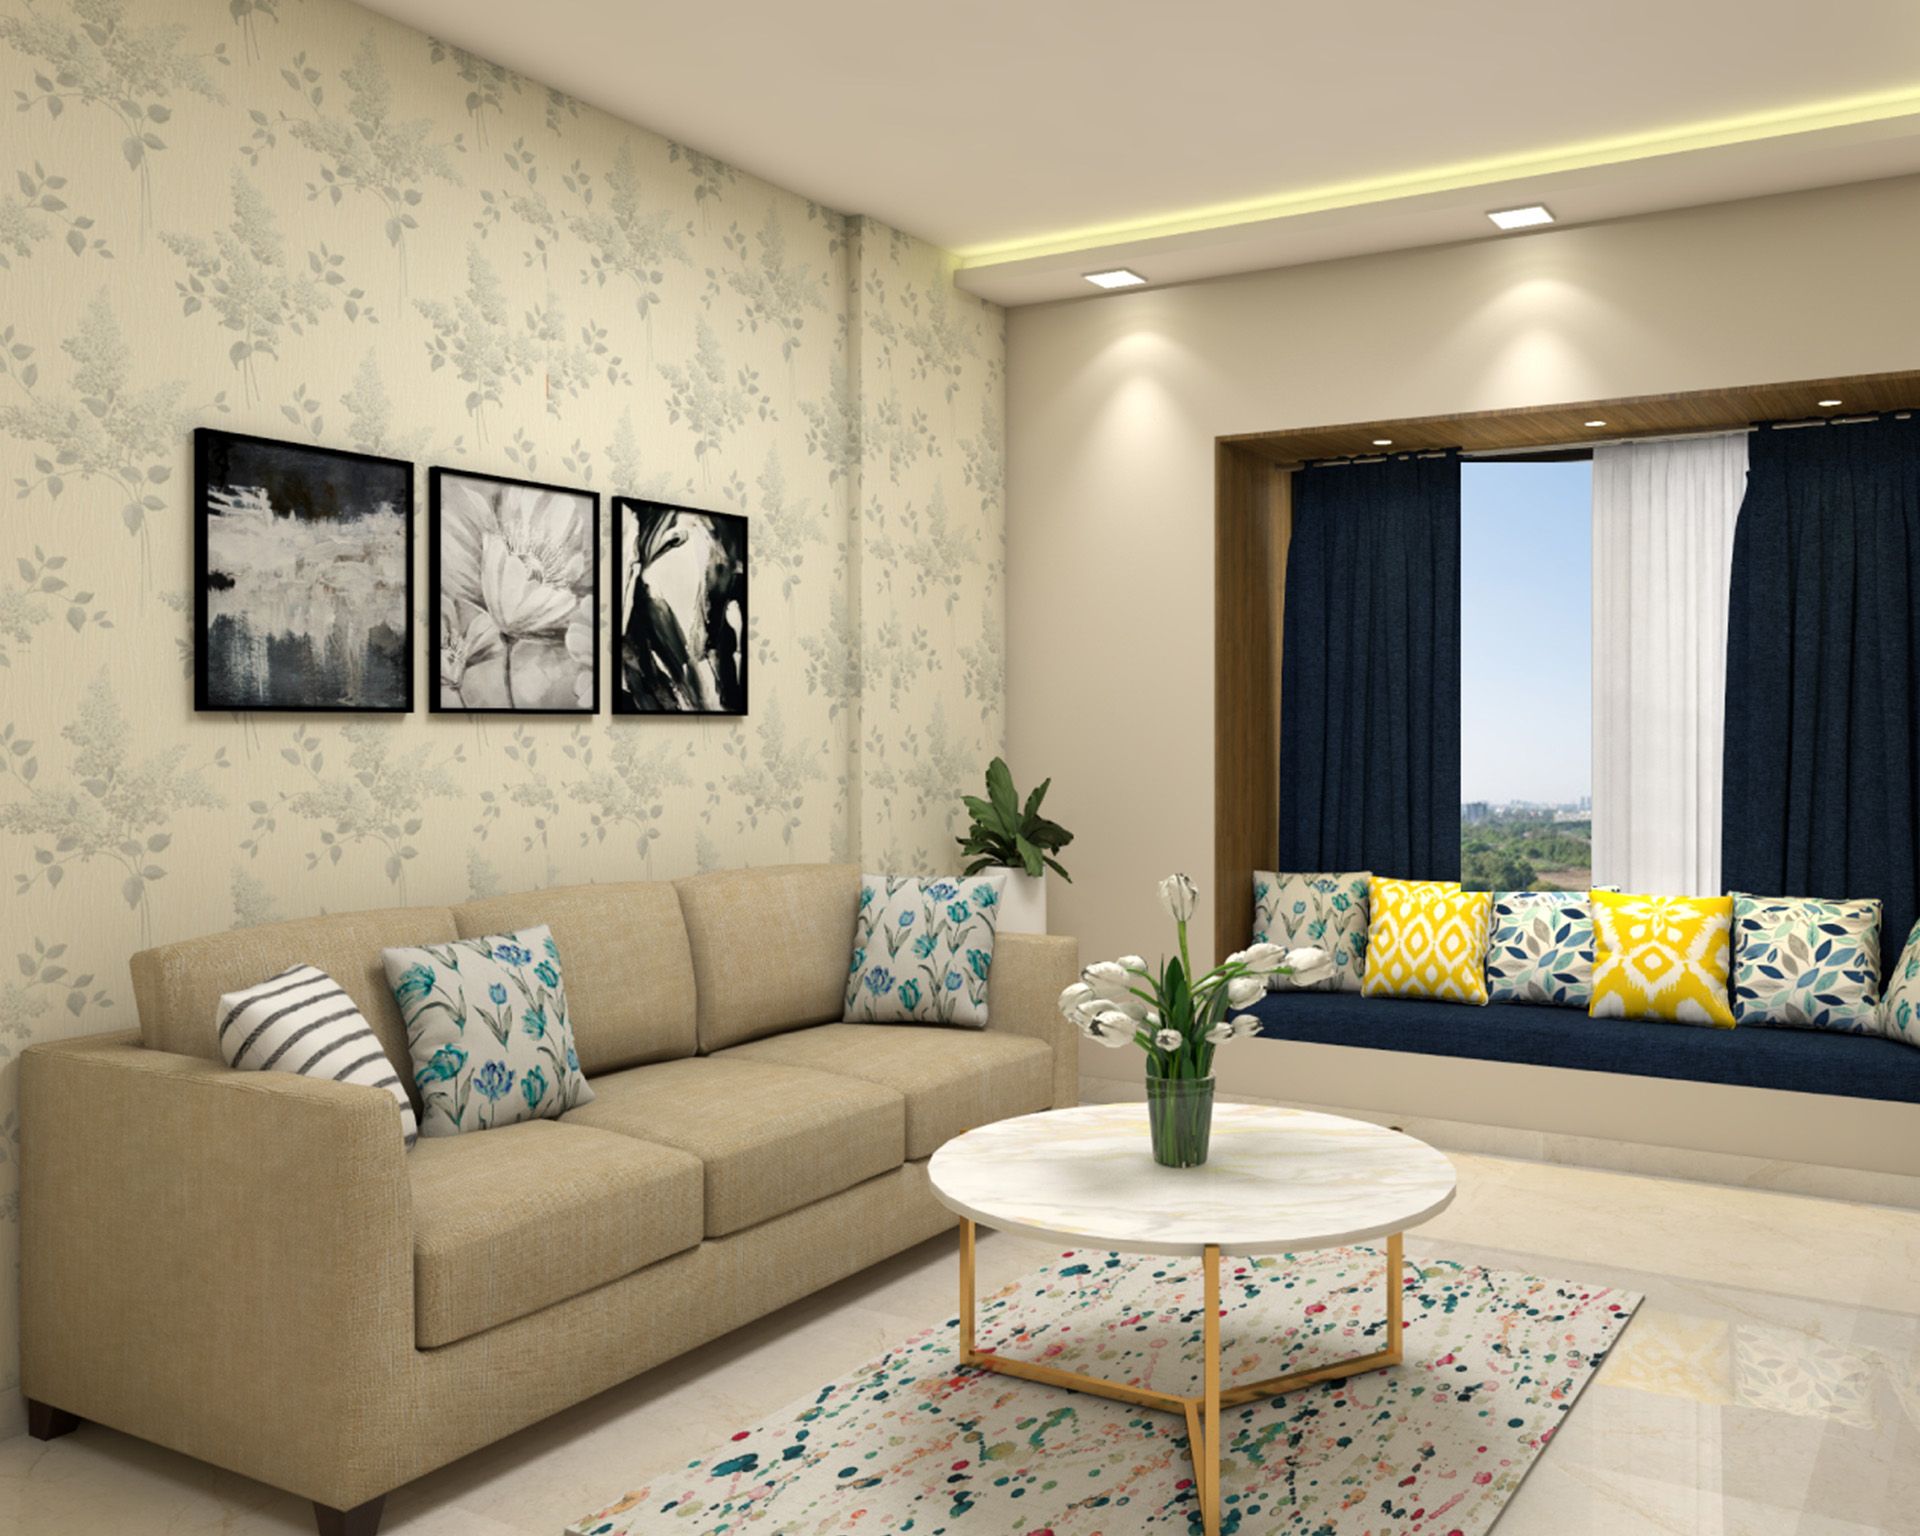 Contemporary Living Room Design With Beige-Blue Seaters And Beige Leafy Wallpaper